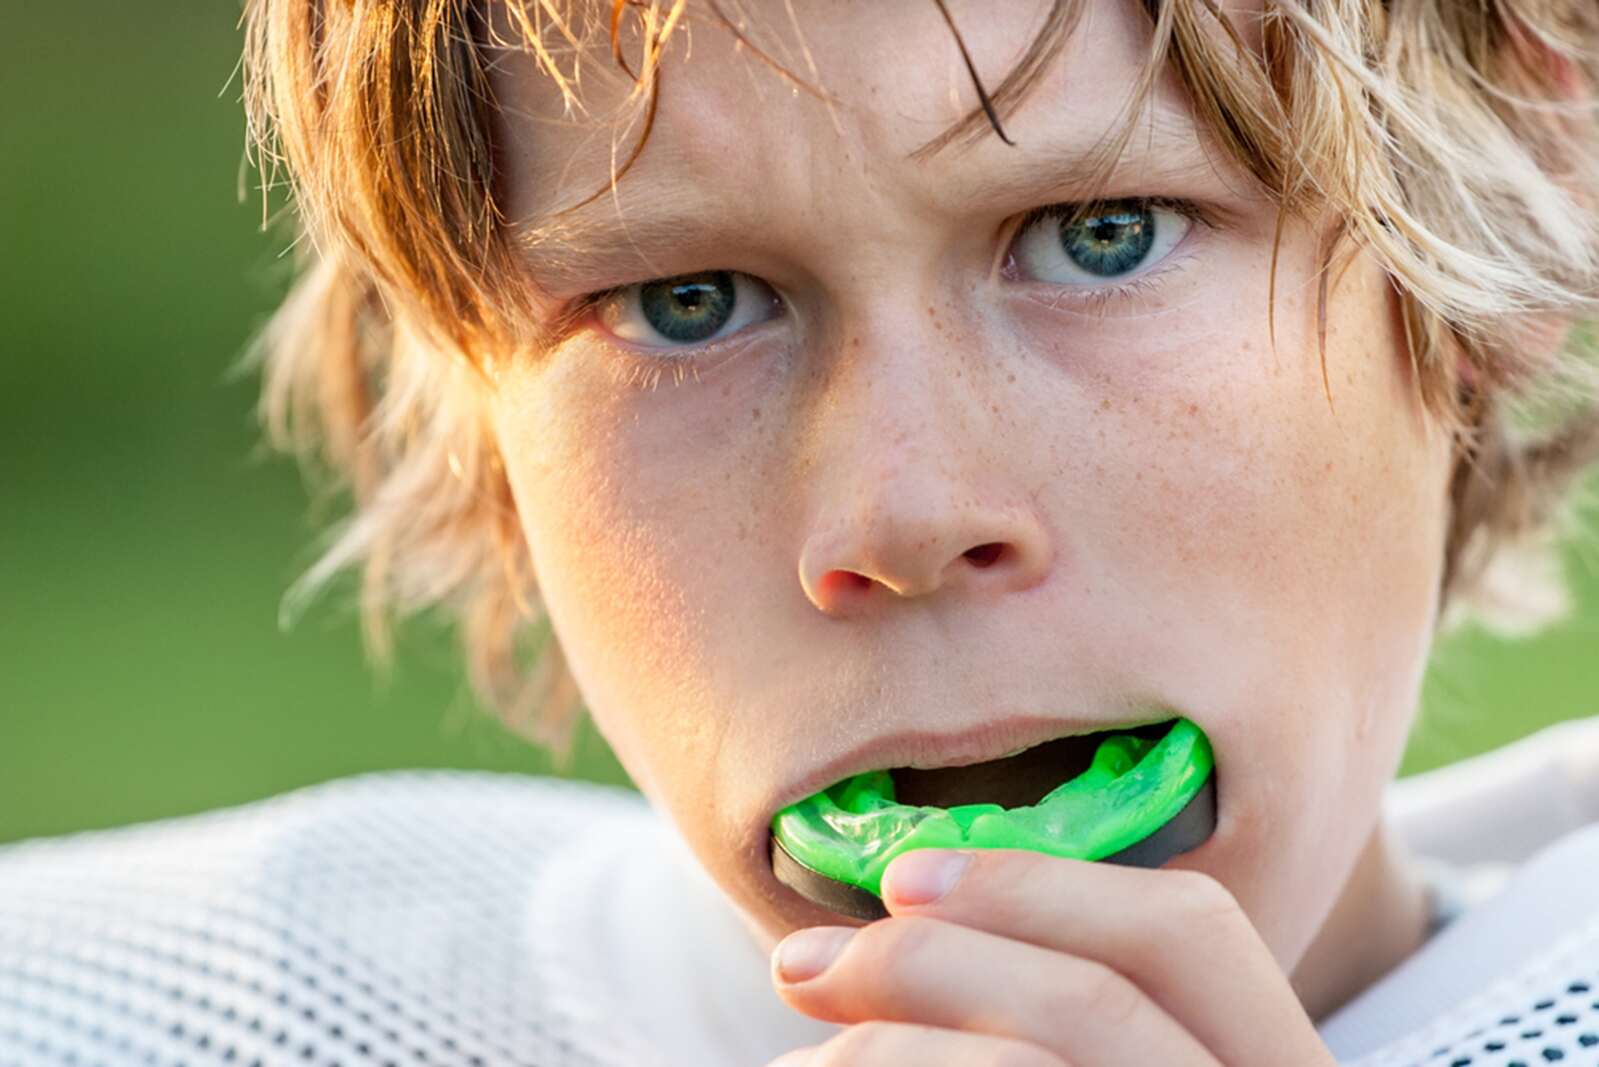 wear mouth guards during sports